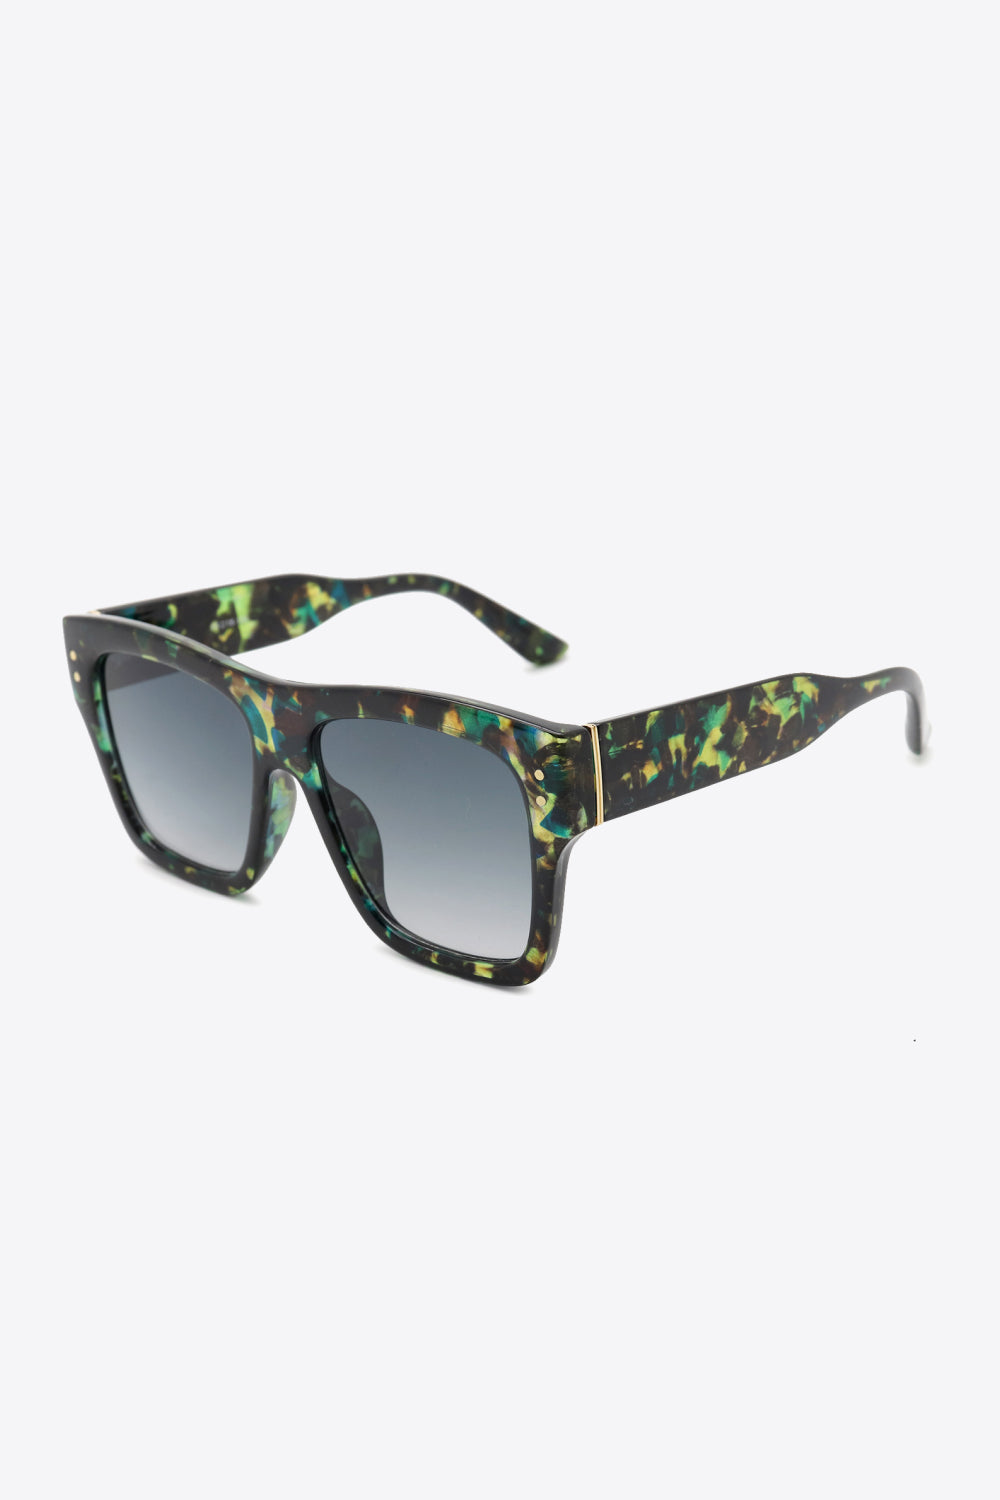 UV400 Patterned Polycarbonate Square Sunglasses - Sunglasses - FITGGINS